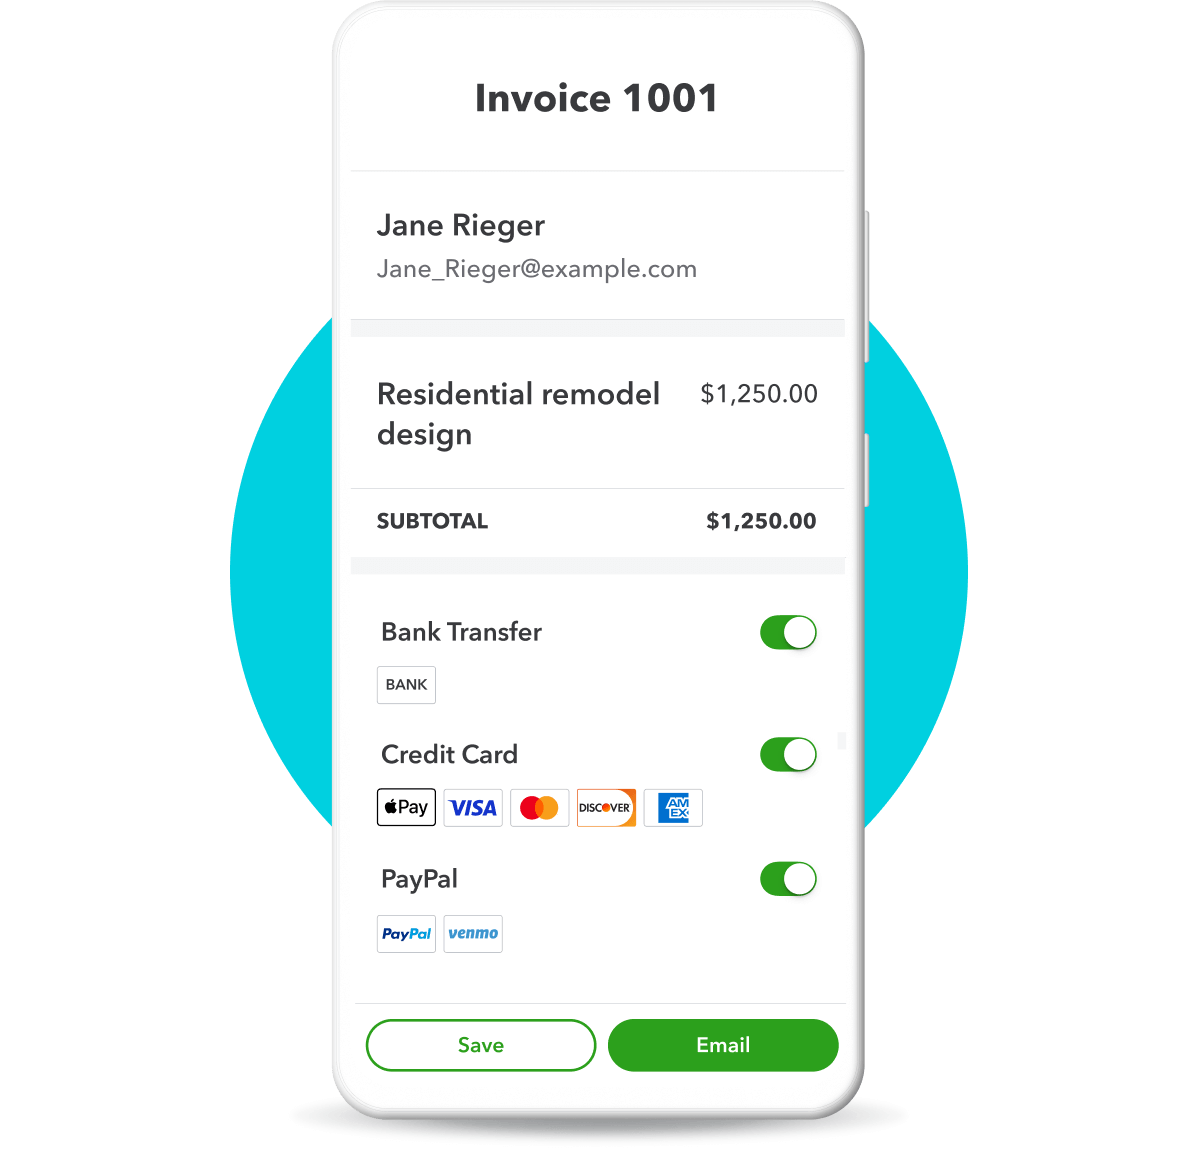 Get paid faster when you enable online payments so customers can pay you right through the invoice